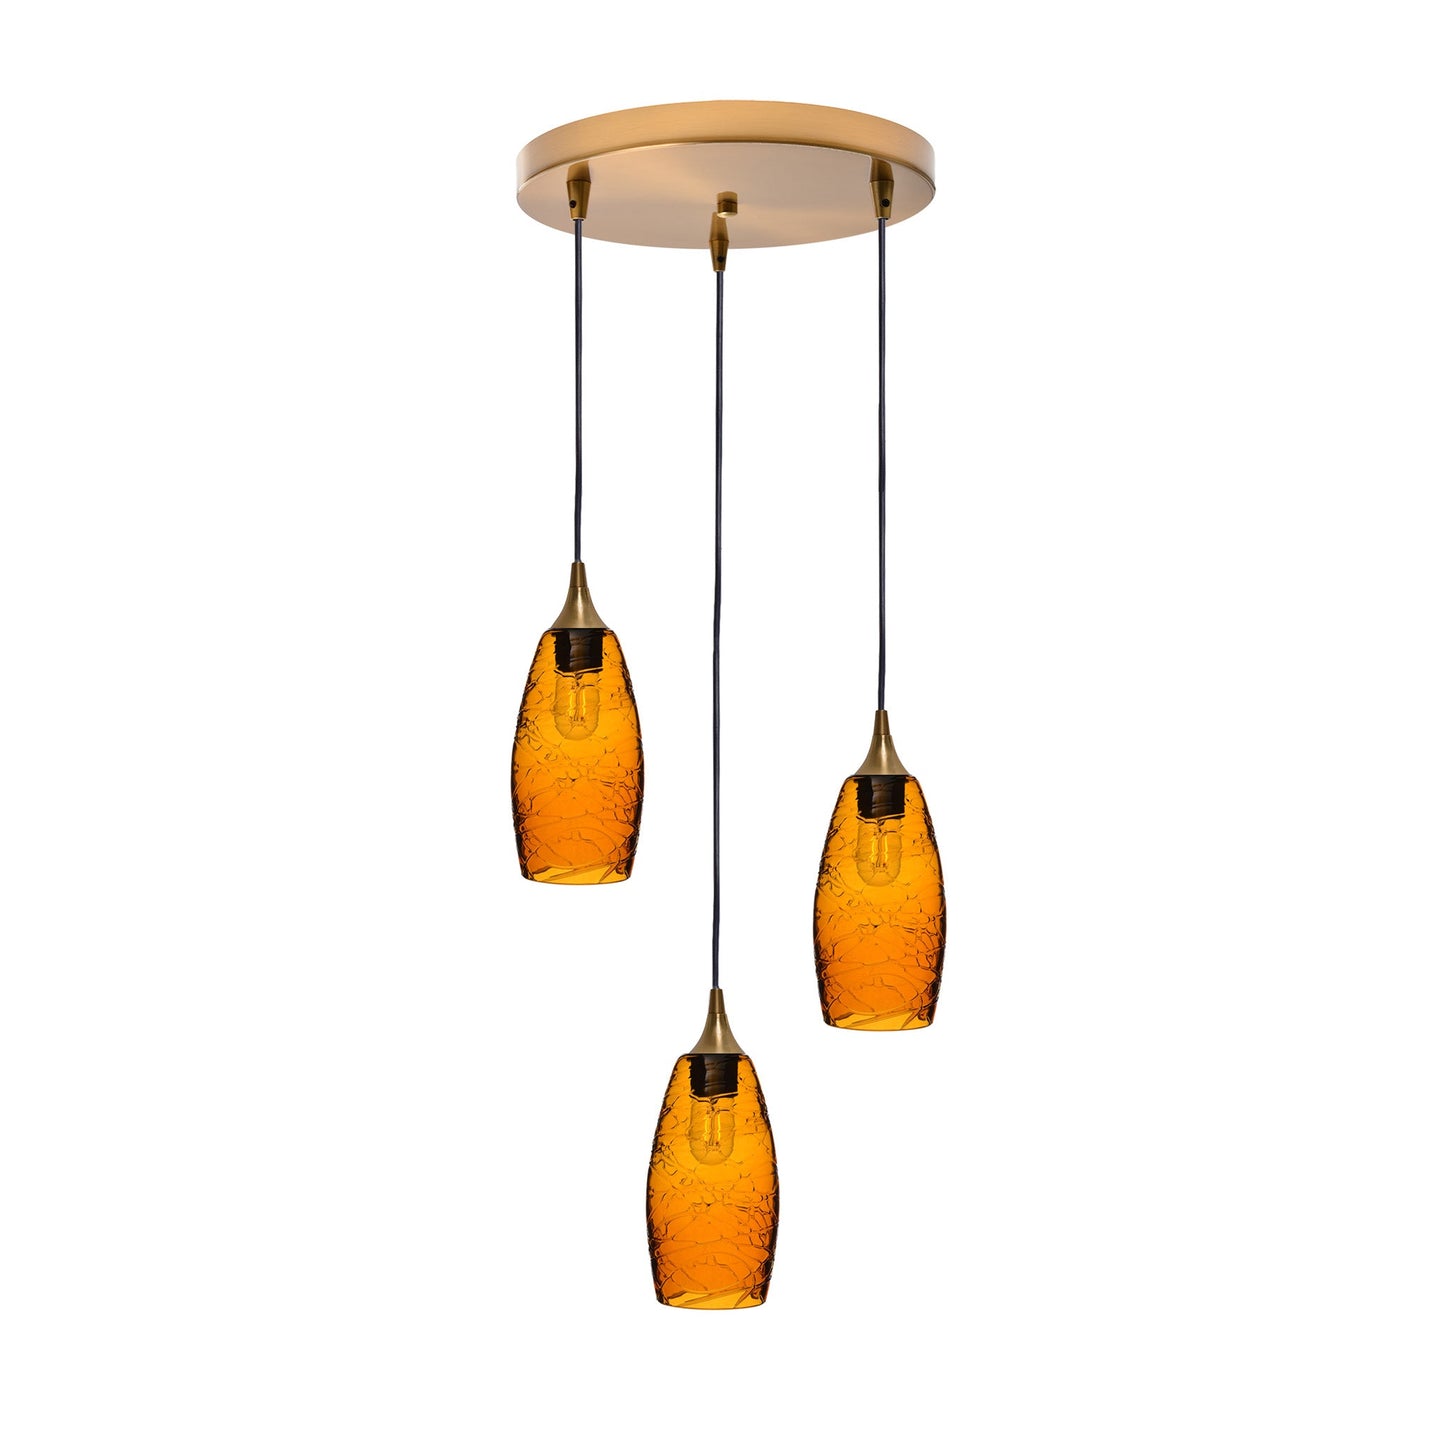 147 Spun: 3 Pendant Cascade Chandelier-Glass-Bicycle Glass Co - Hotshop-Golden Amber-Polished Brass-Bicycle Glass Co